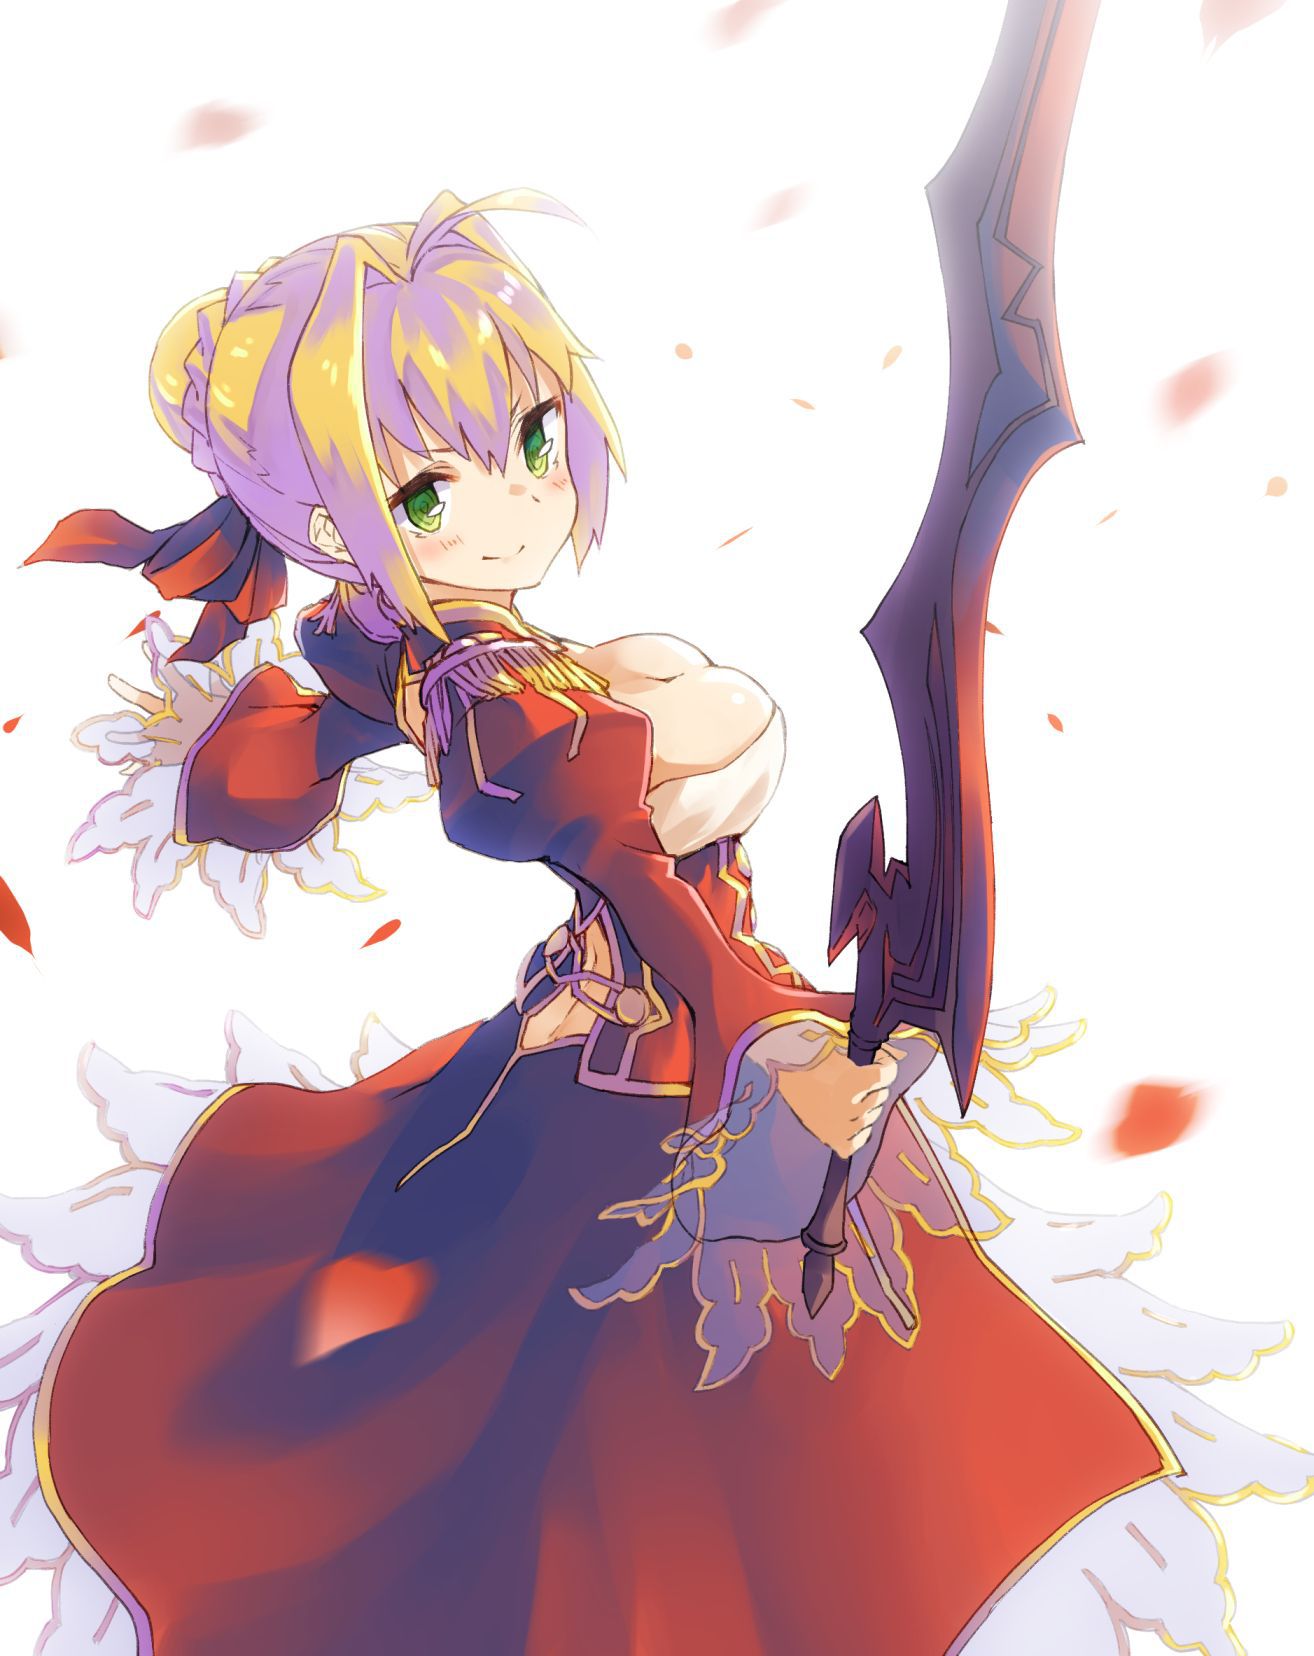 [Secondary ZIP] is about to start anime 100 pieces of cute image summary of Nero Claudius so soon 36